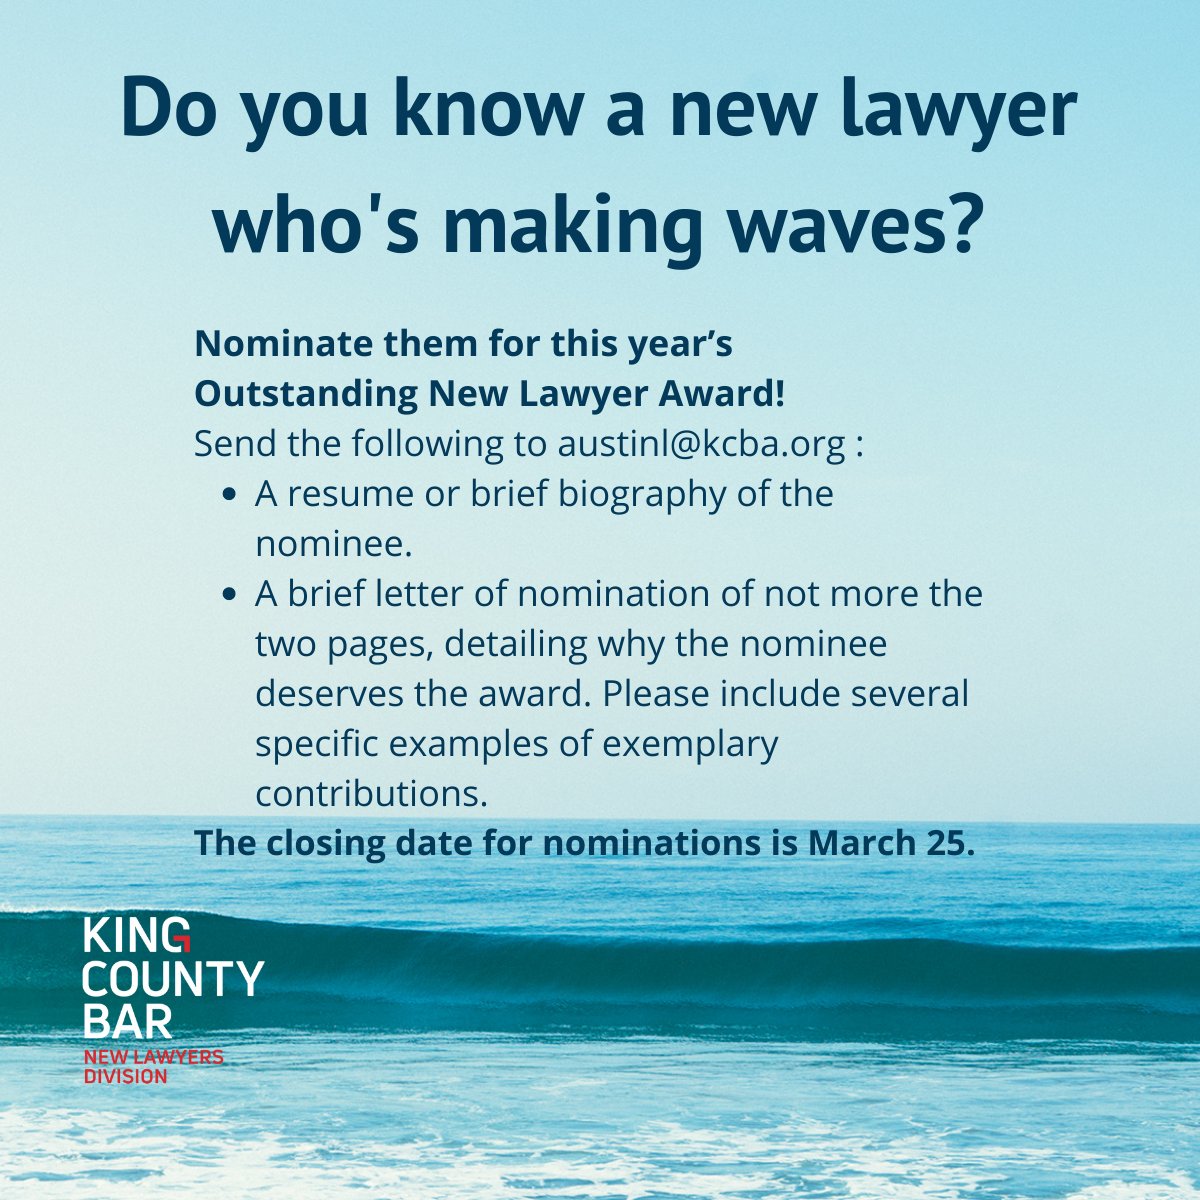 Nominations for the Outstanding New Lawyer Award now open! #lawyer #NLD #KingCounty #nominationsfor